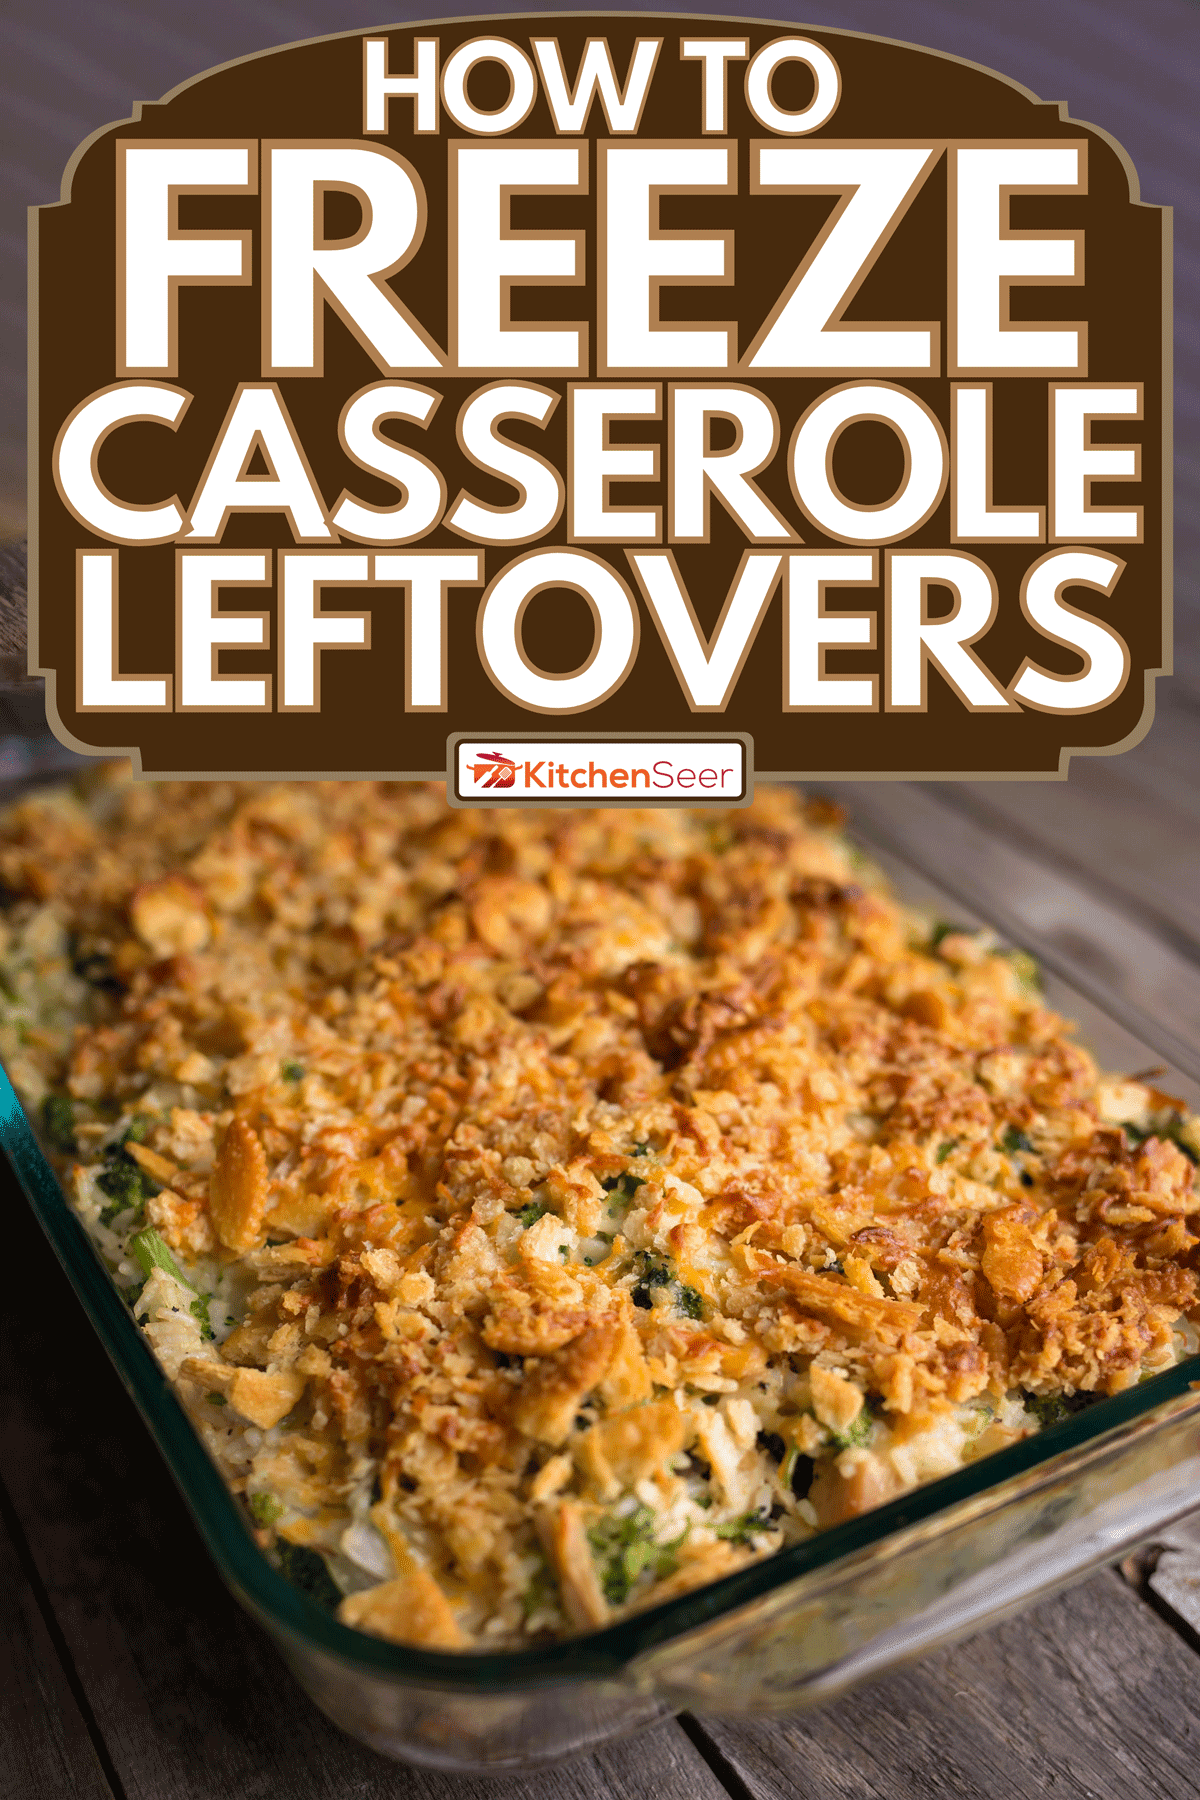 Turkey casserole with broccoli, rice and crumbled crackers, How To Freeze Casserole Leftovers